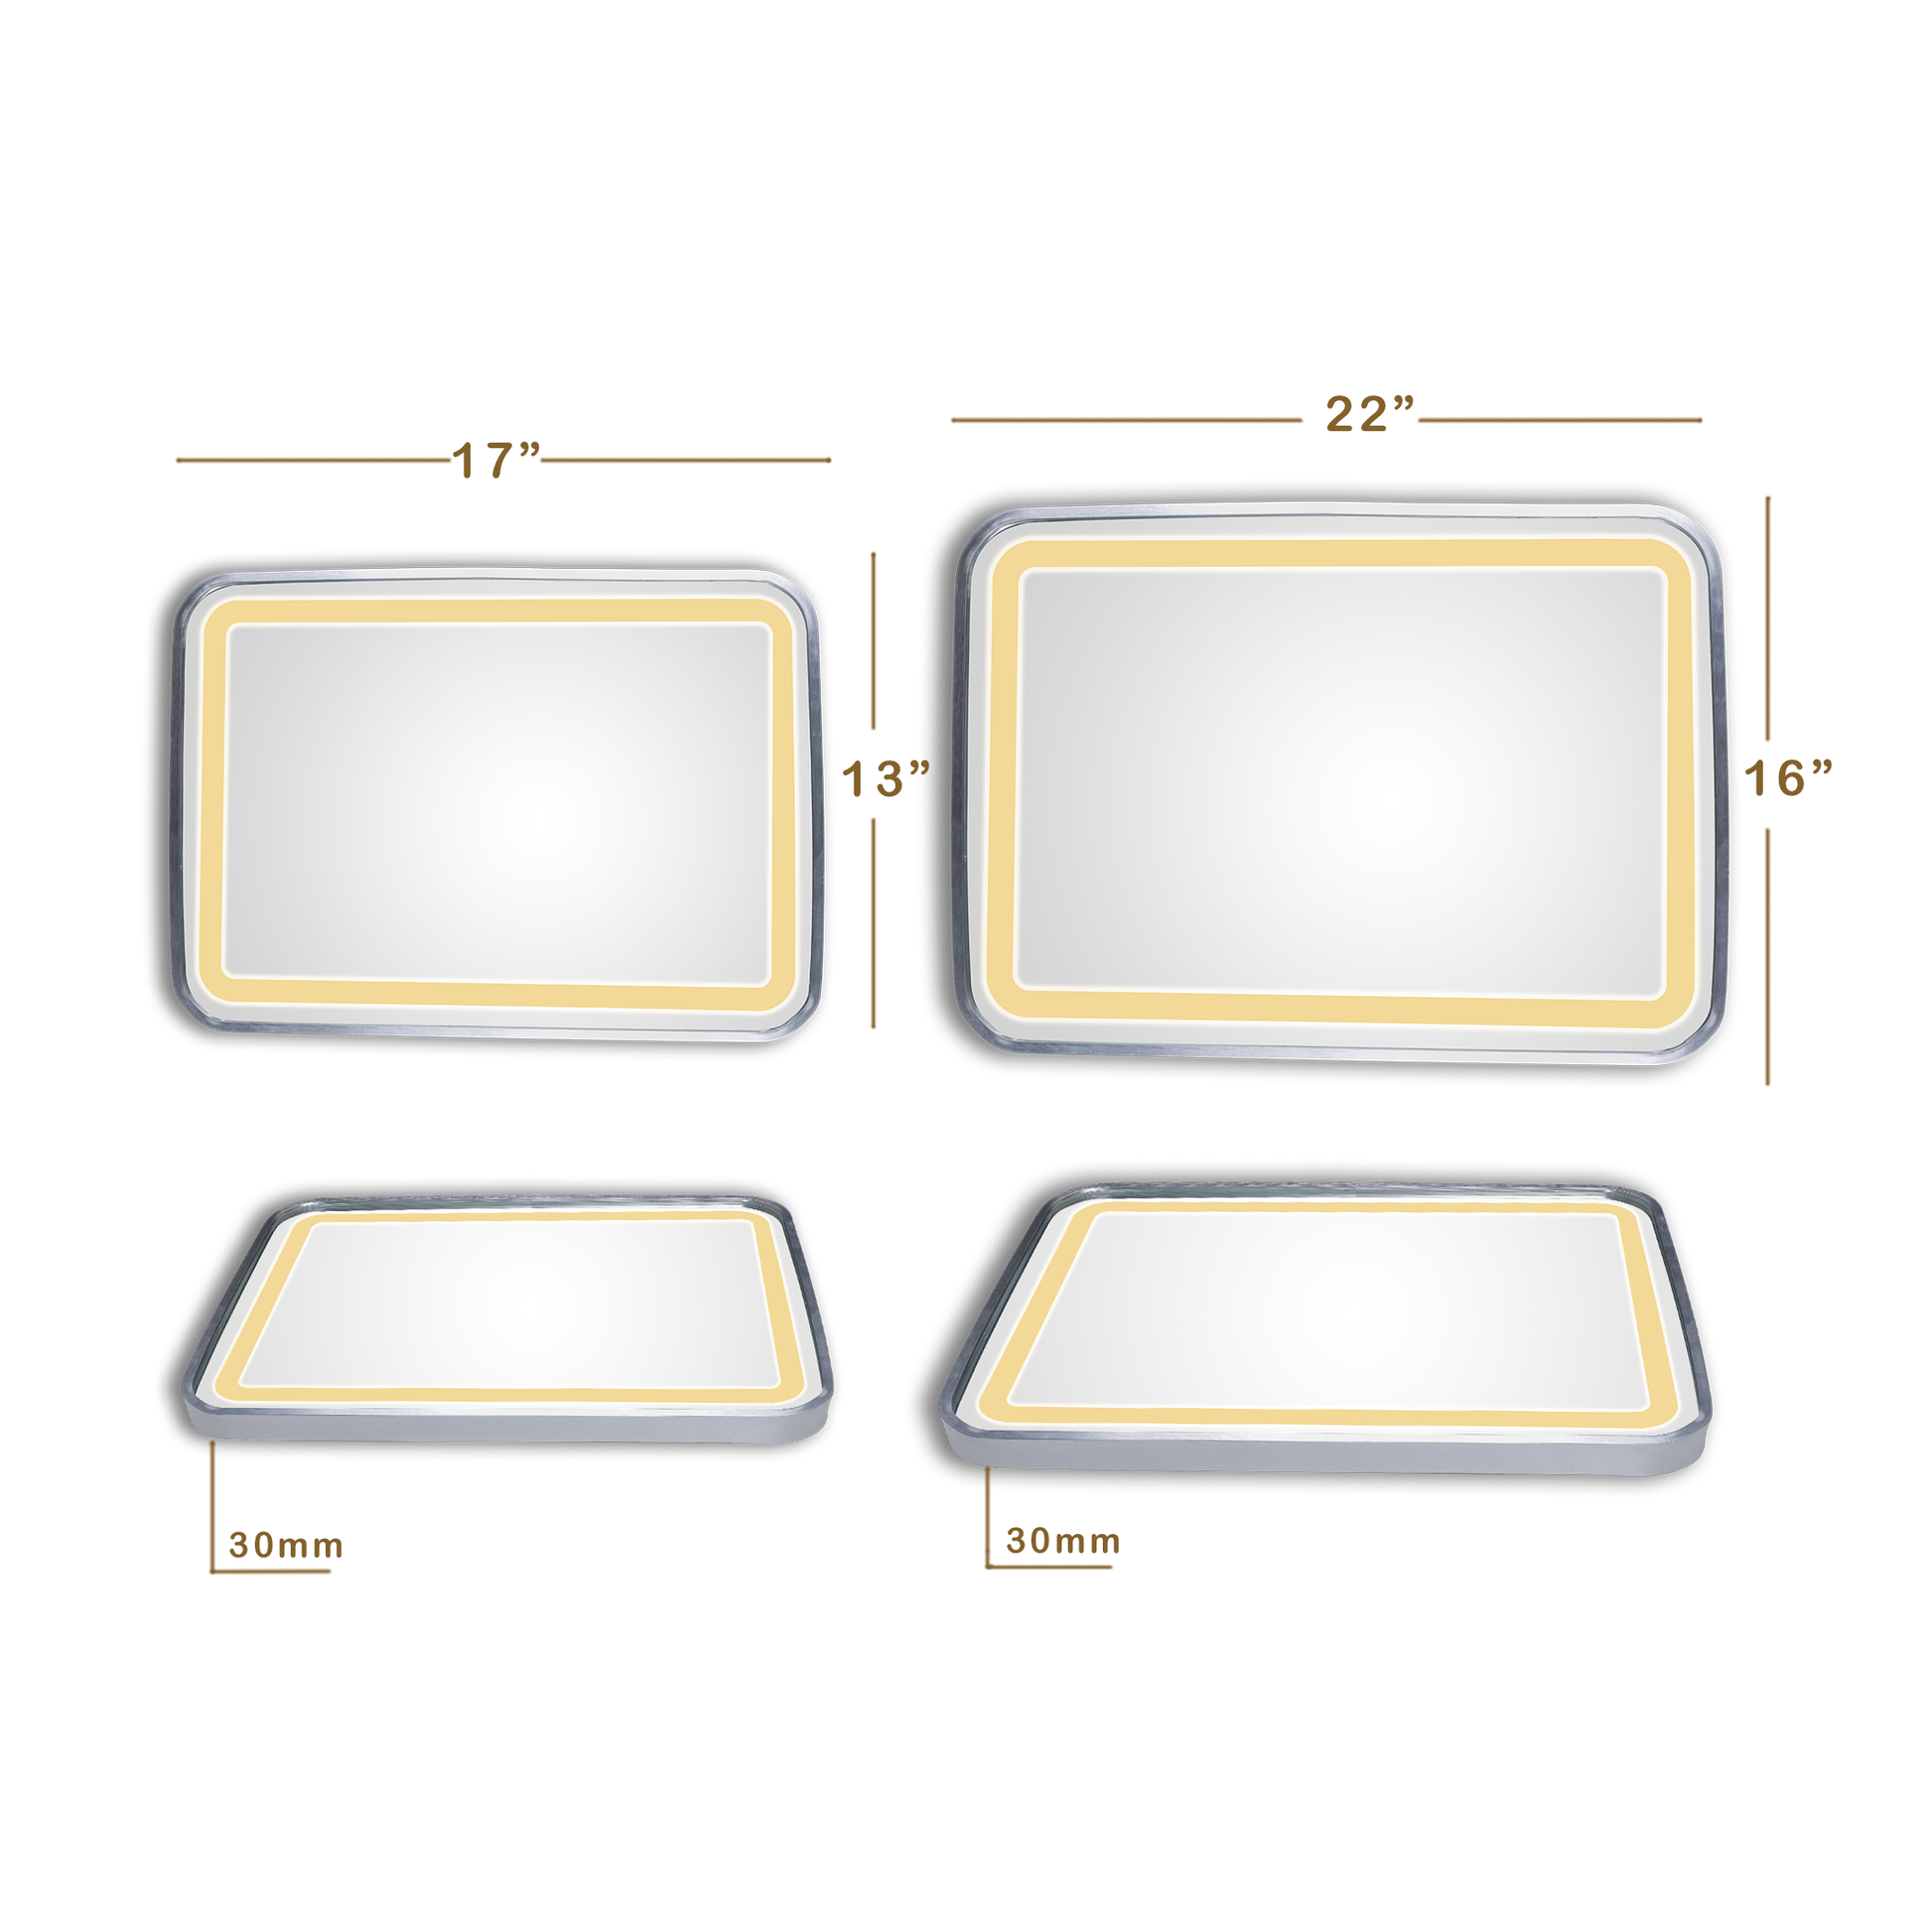 a33dc3f2-ac12-48a3-95d8-0feaf4019654/Rectangle_Horizontal_30_SILVER_DIMENSIONS.png